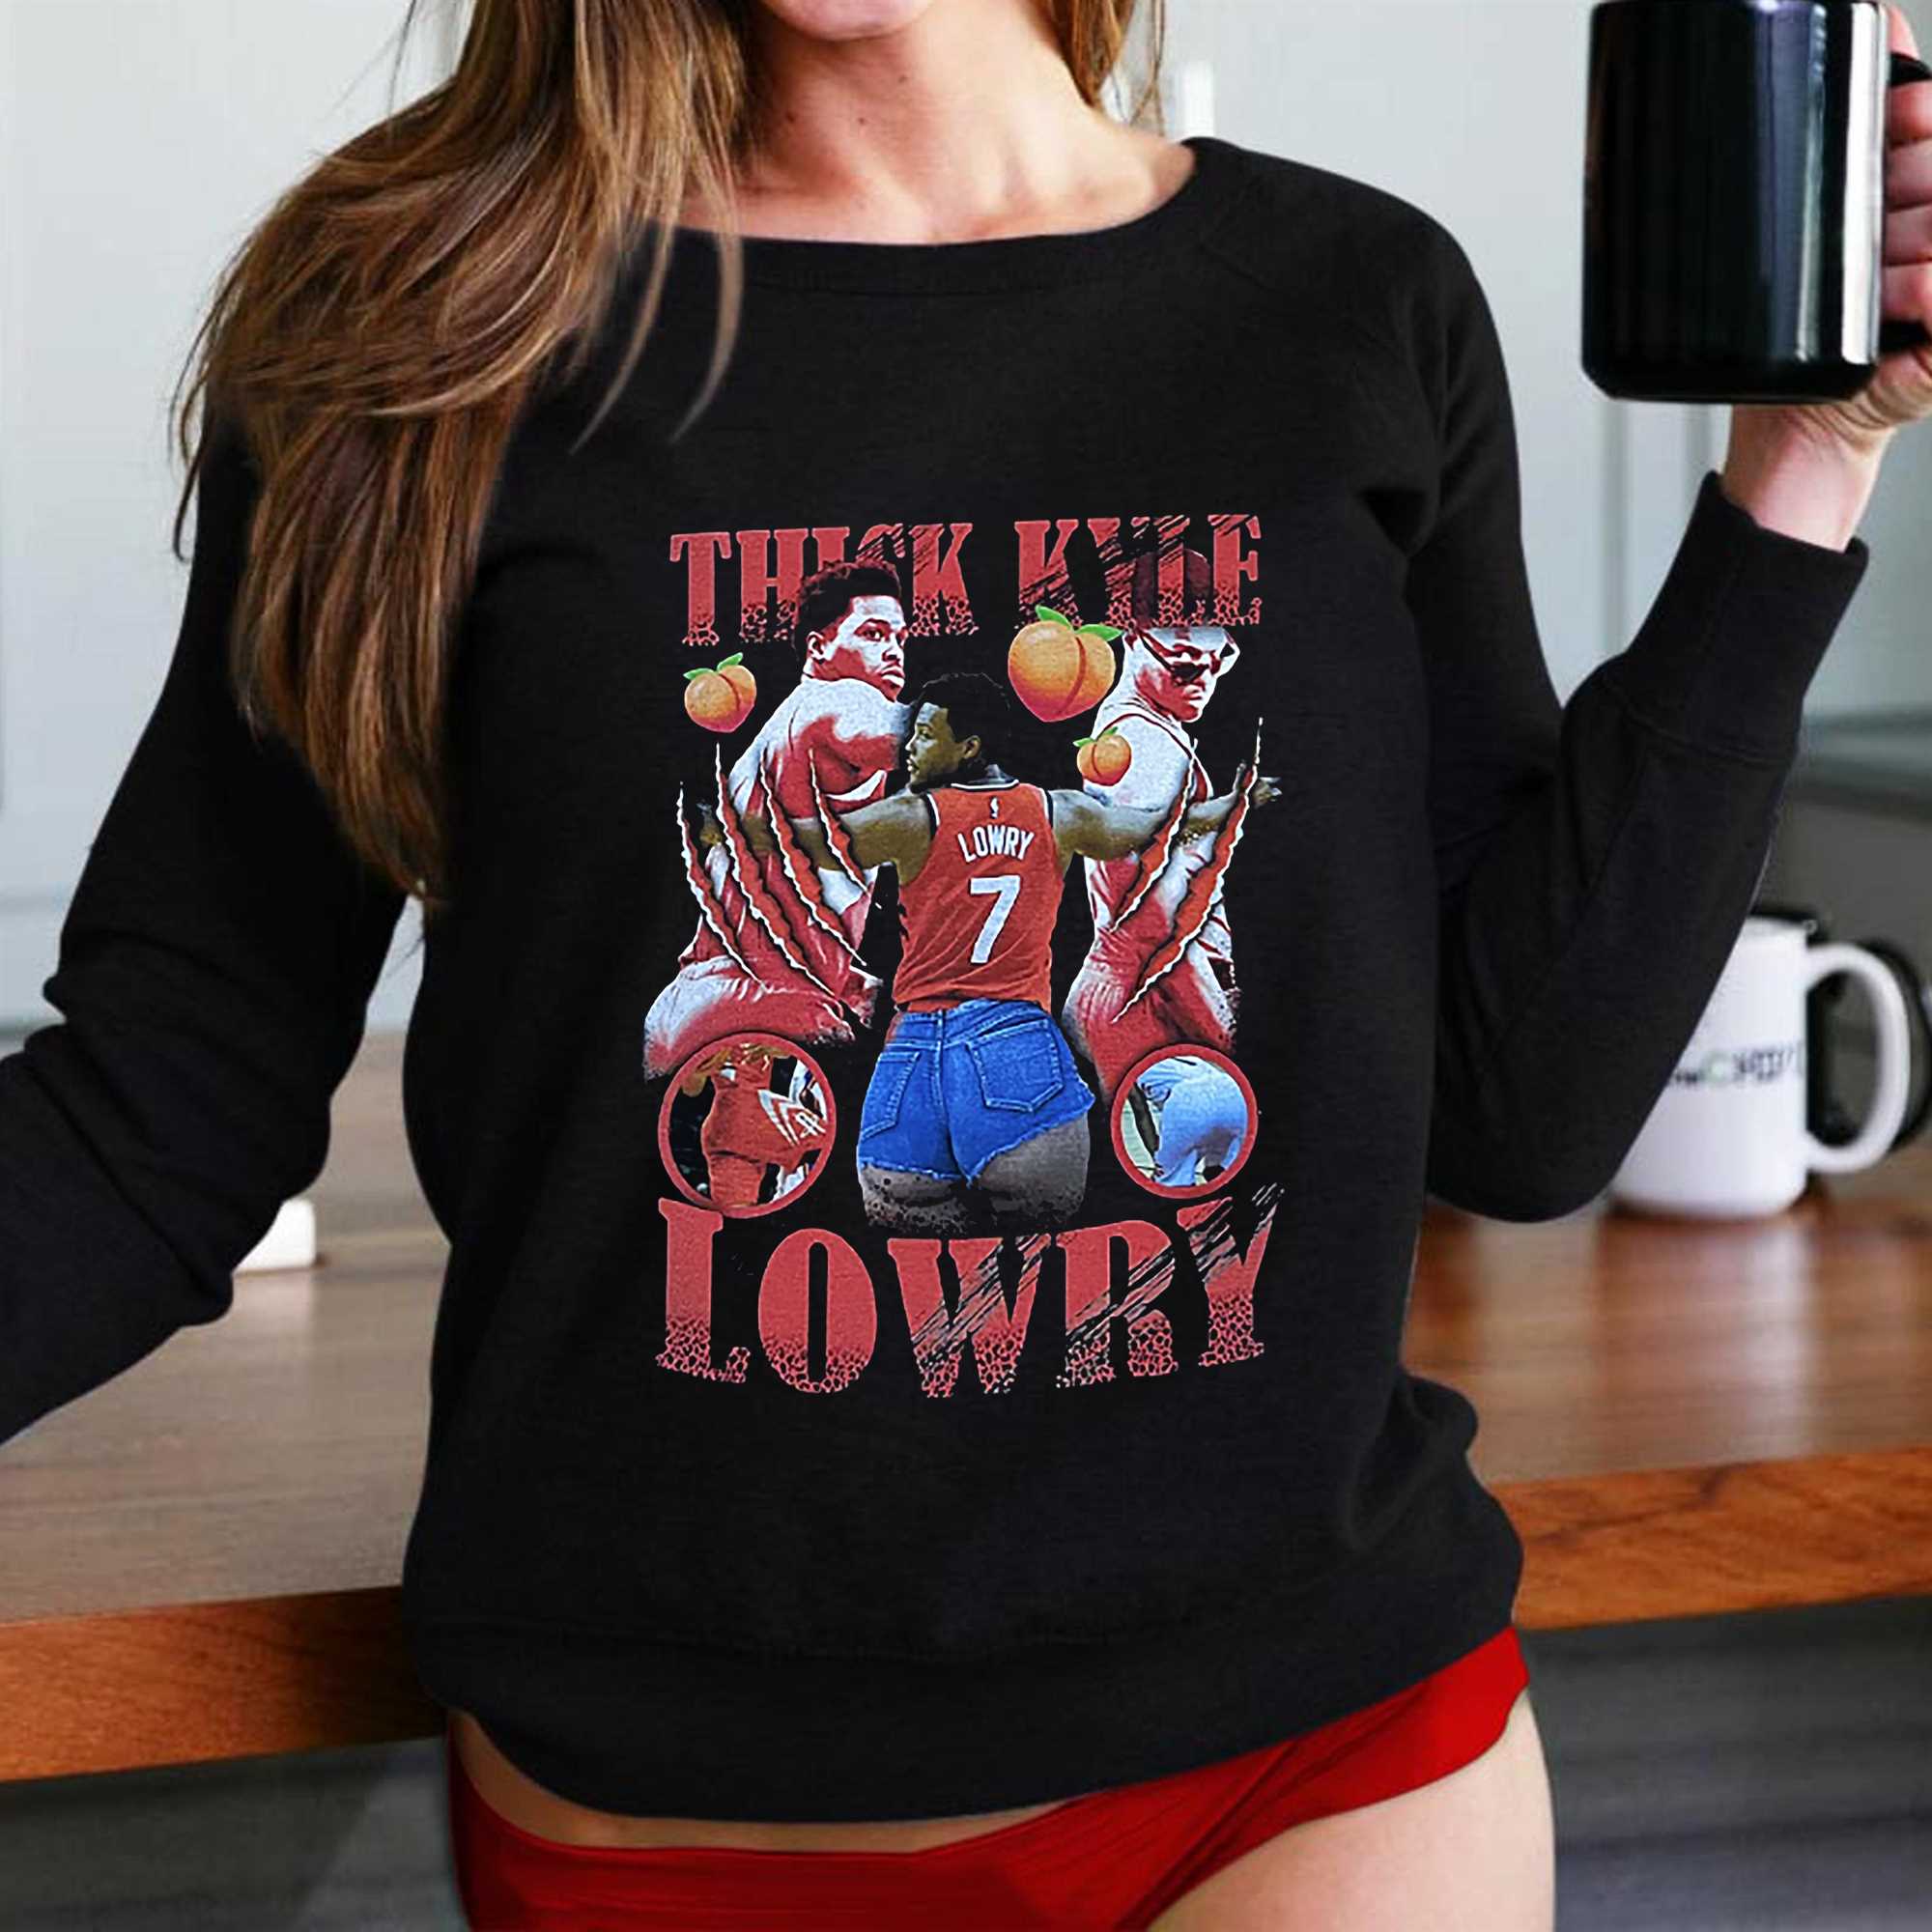 Thick Kyle Lowry Shirt